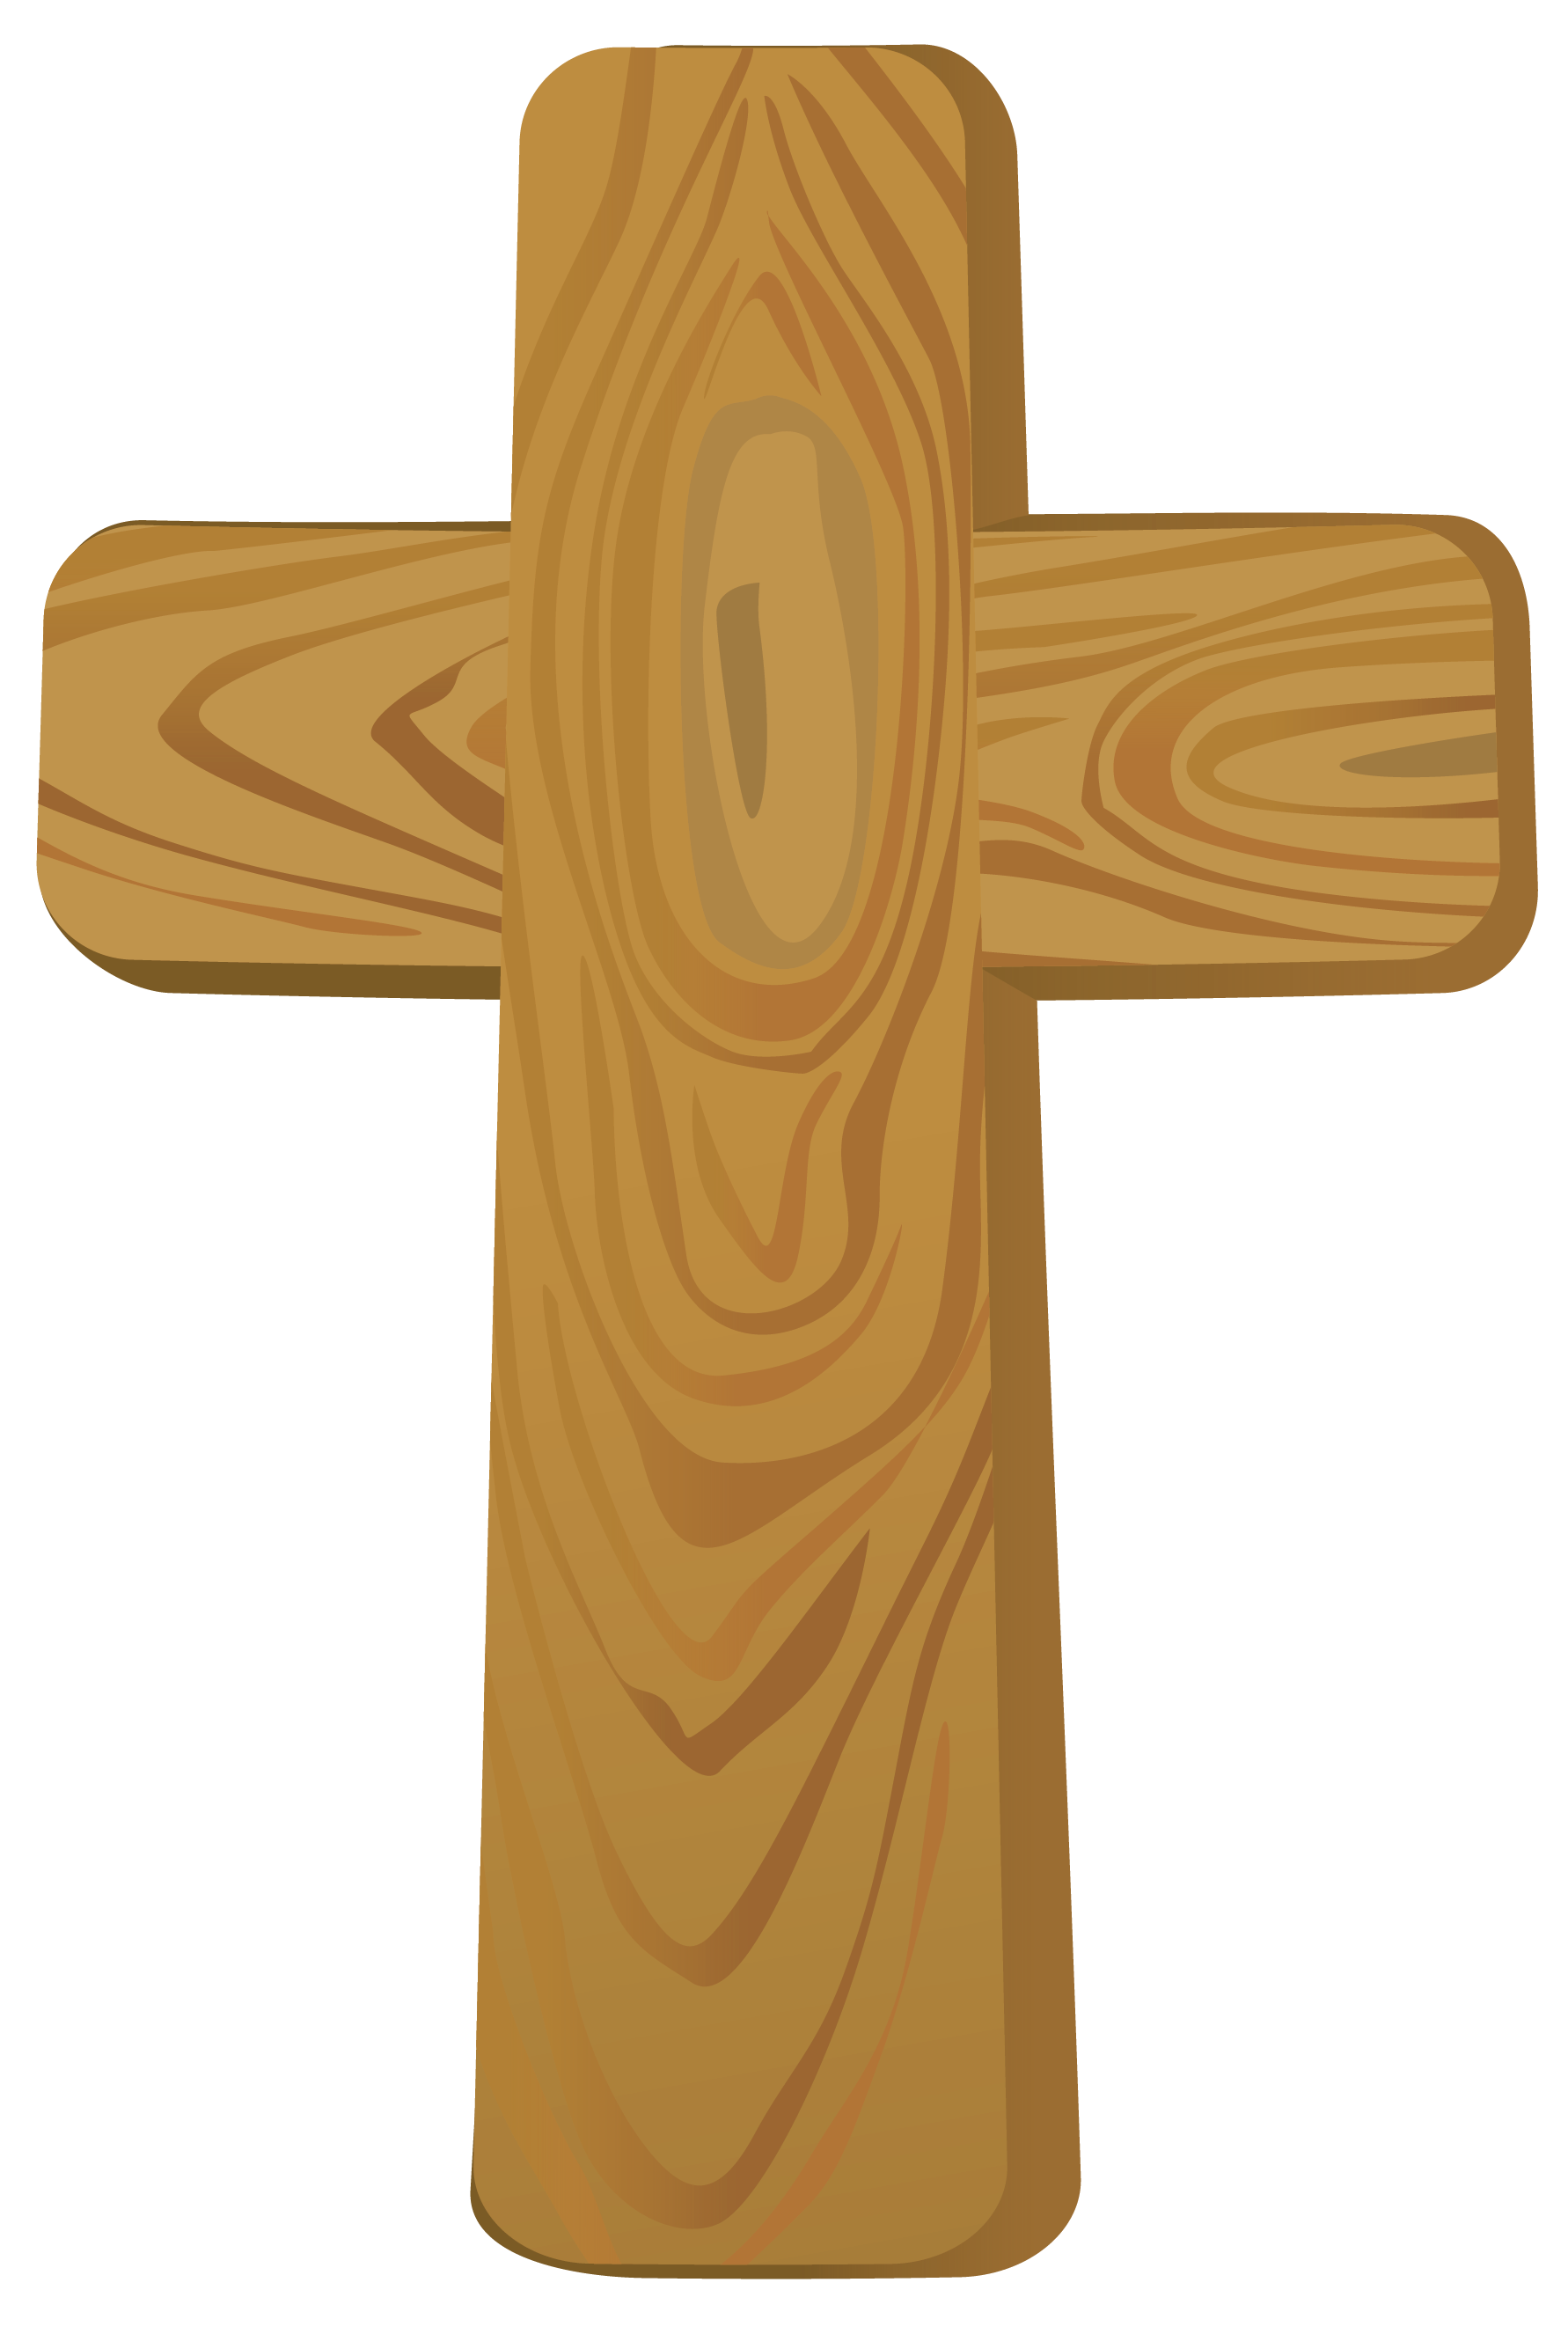 Wooden cross clipart picture - Cliparting.com